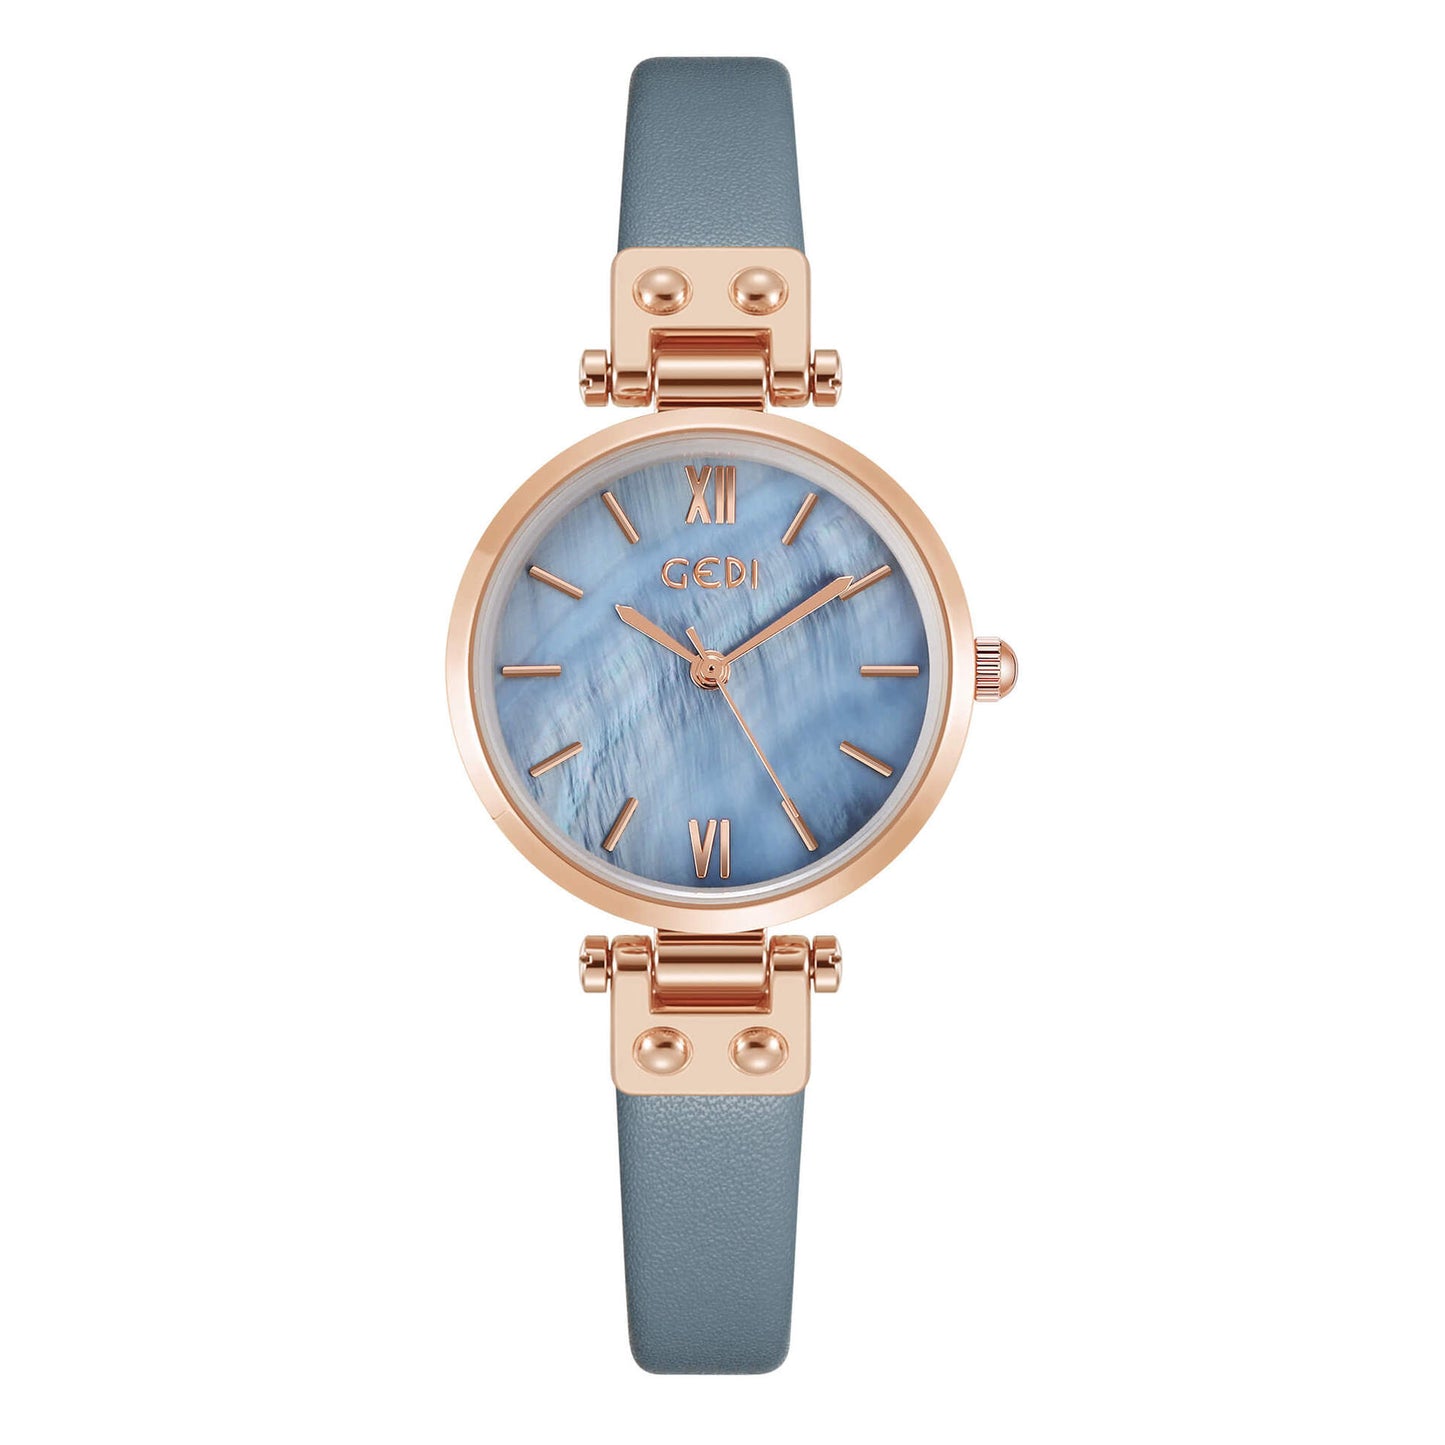 New Art-style Student's Watch Women's Waterproof Watch With Delicate And Small Dial